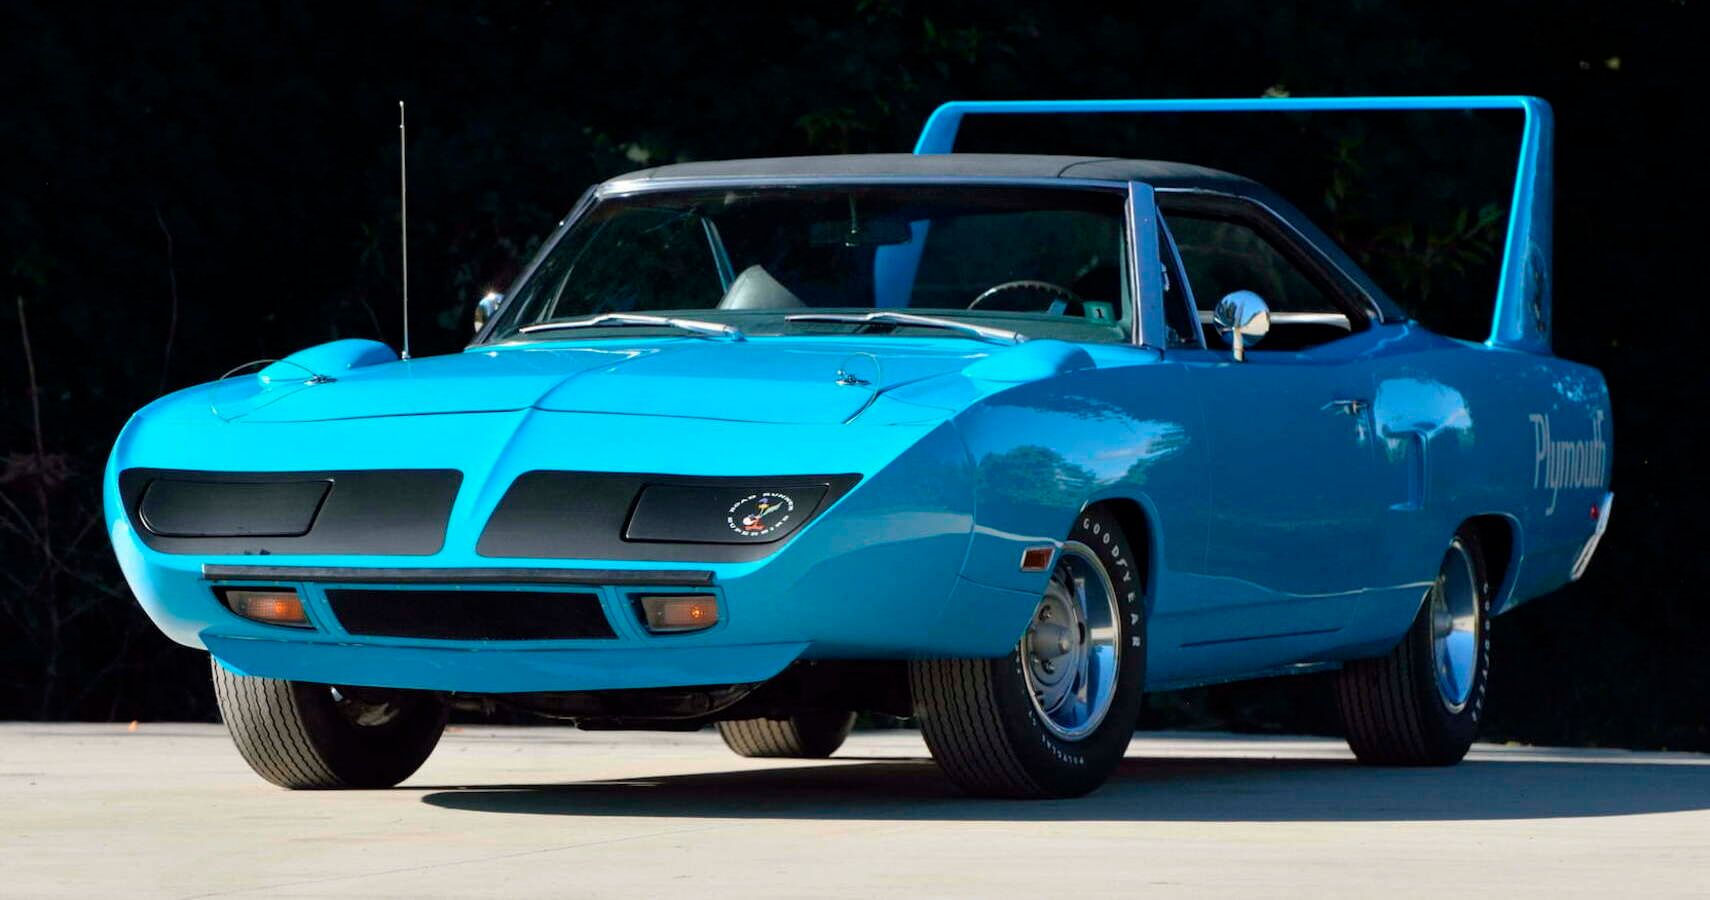 A blue 1970 Plymouth Superbird parked